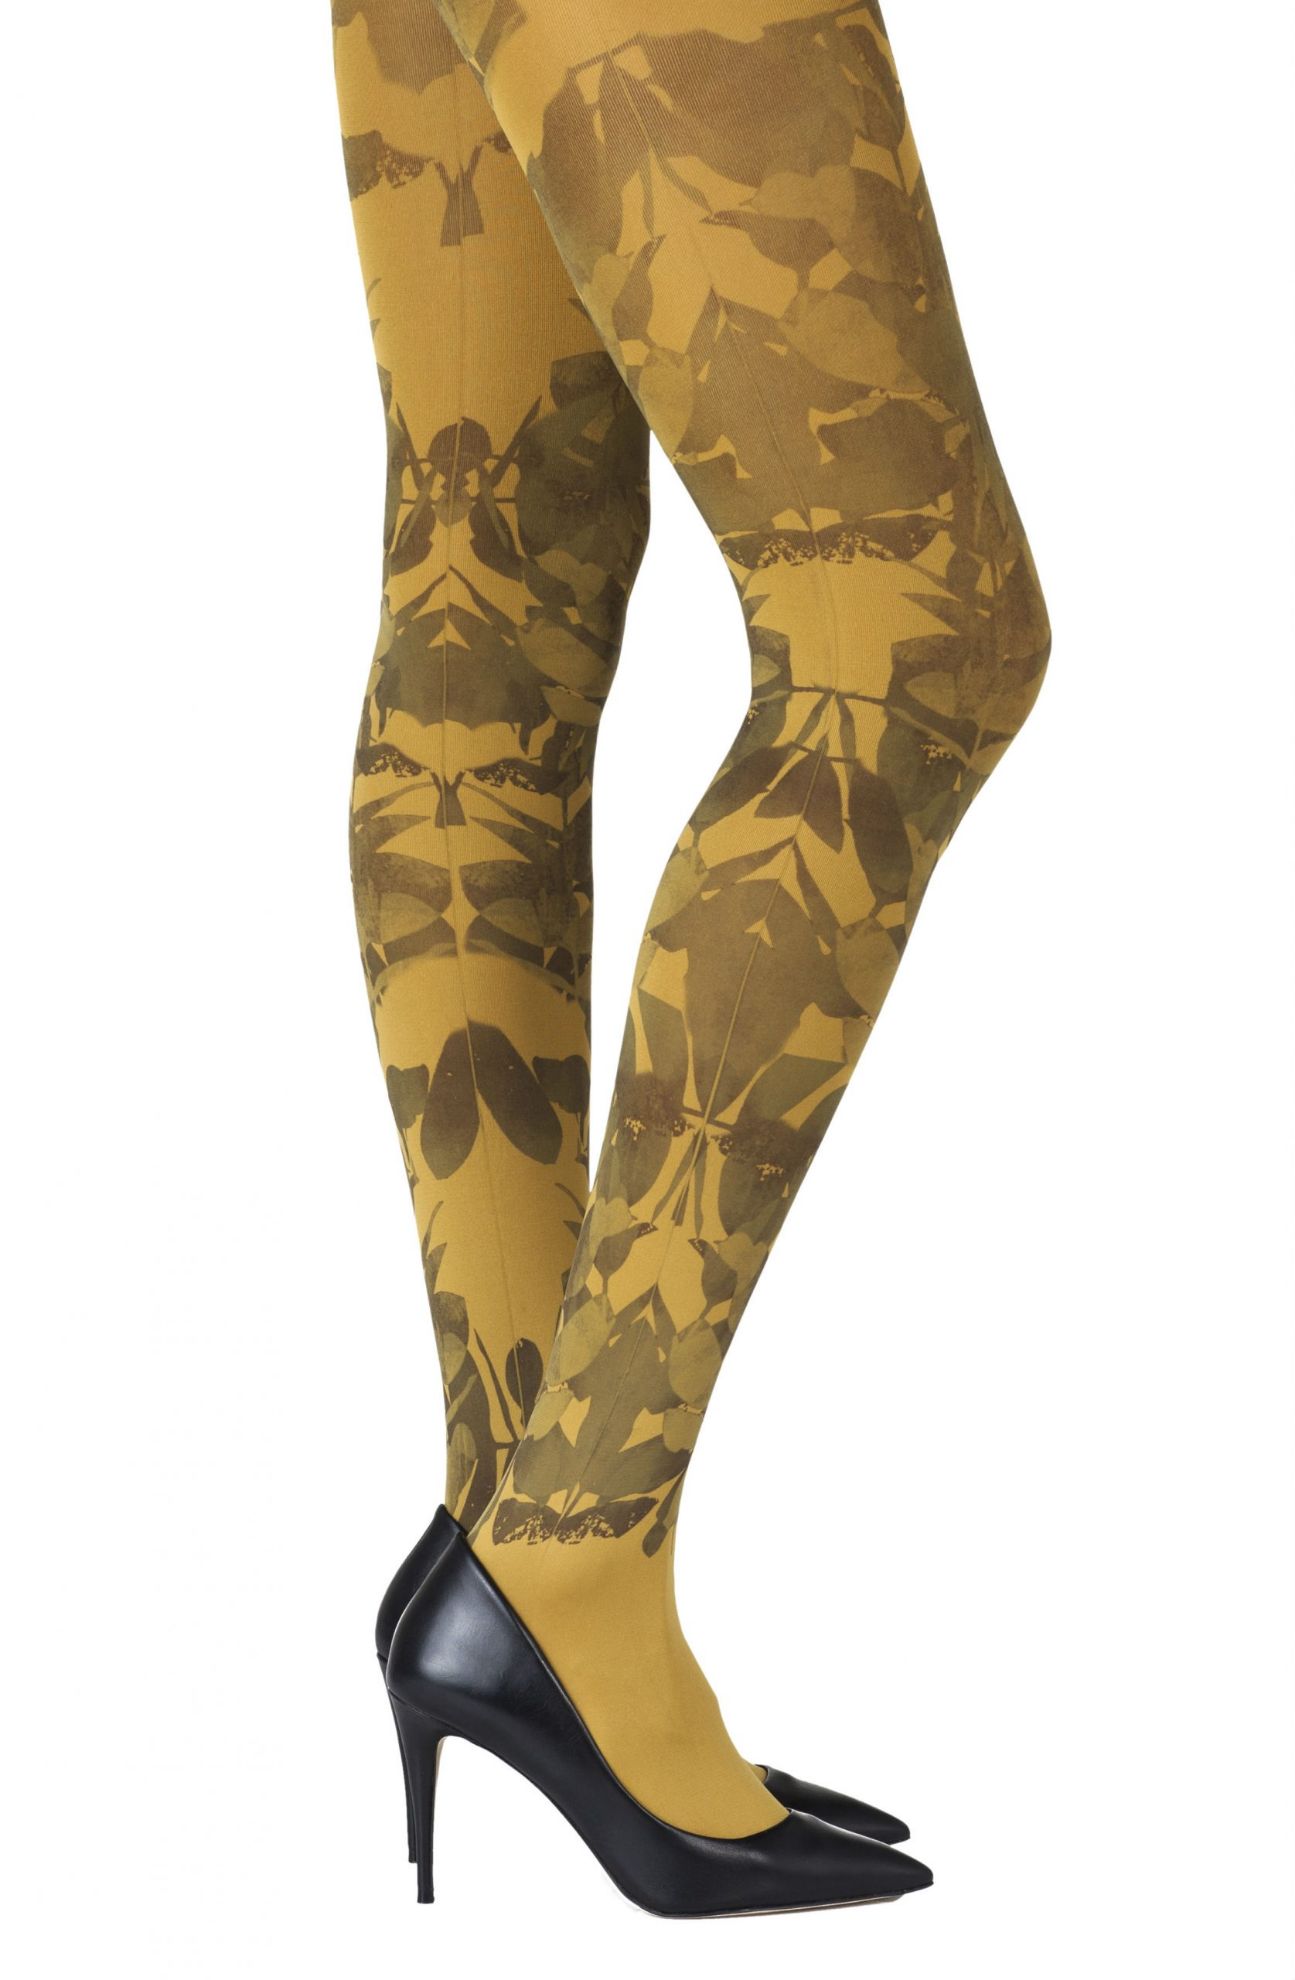 Picture of Zohara "Don't Leave Me" Mustard Tights